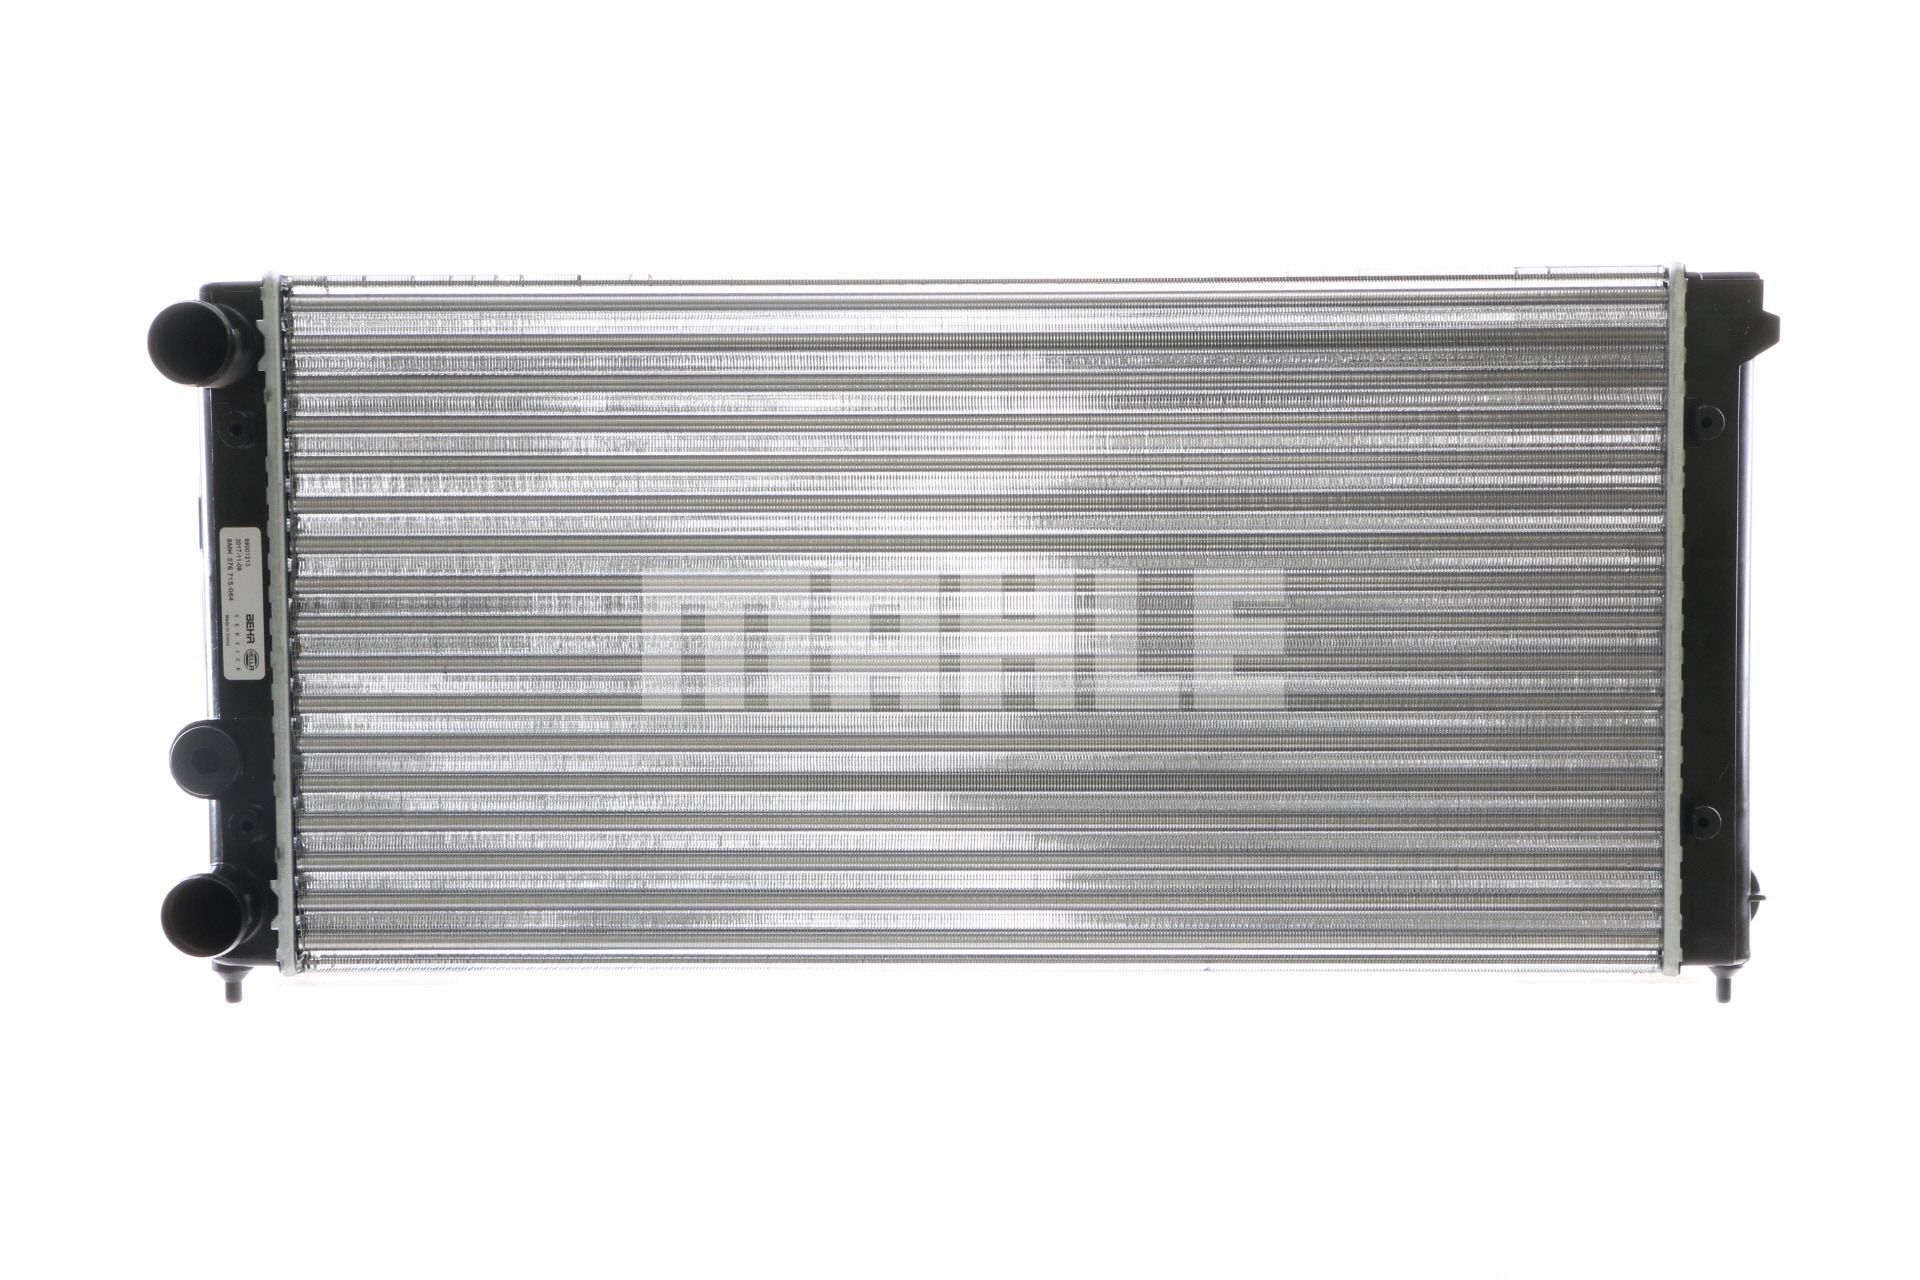 376715064 MAHLE ORIGINAL for vehicles with/without air conditioning, 628 x 322 x 34 mm, Manual Transmission, Mechanically jointed cooling fins Radiator CR 411 000S buy